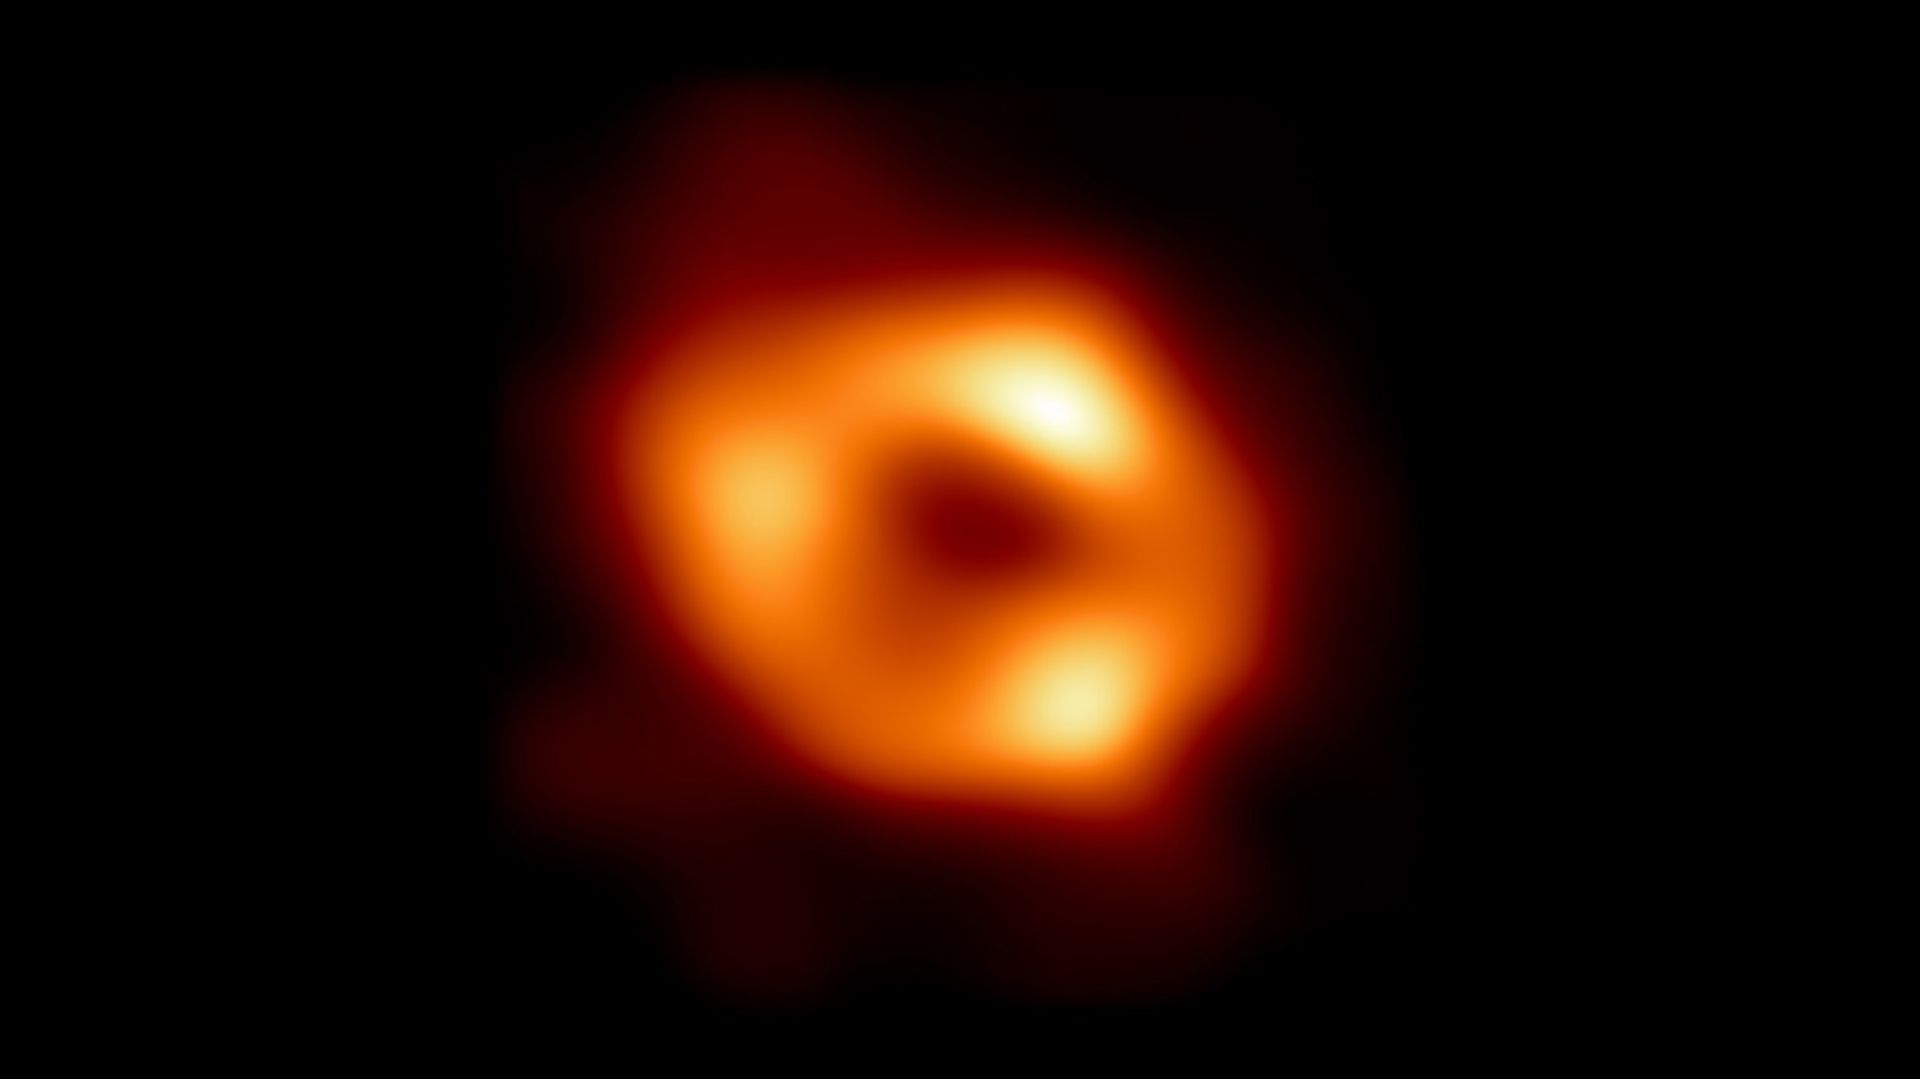 The black hole at the center of the Milky Way